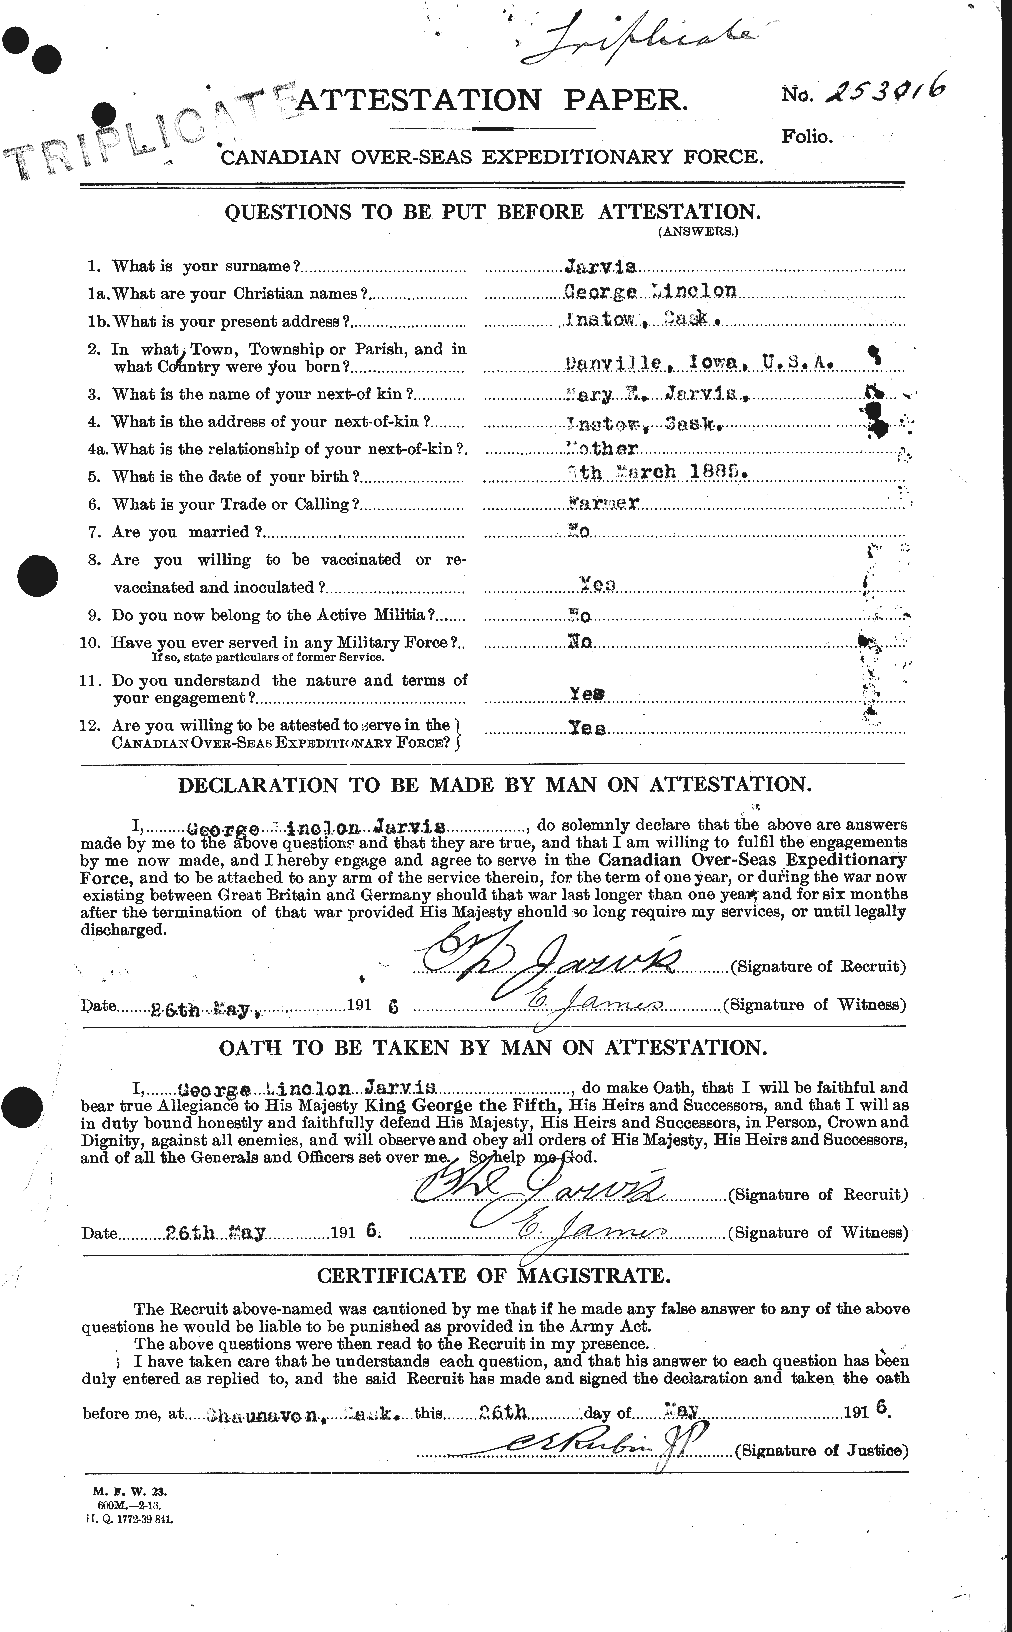 Personnel Records of the First World War - CEF 414706a